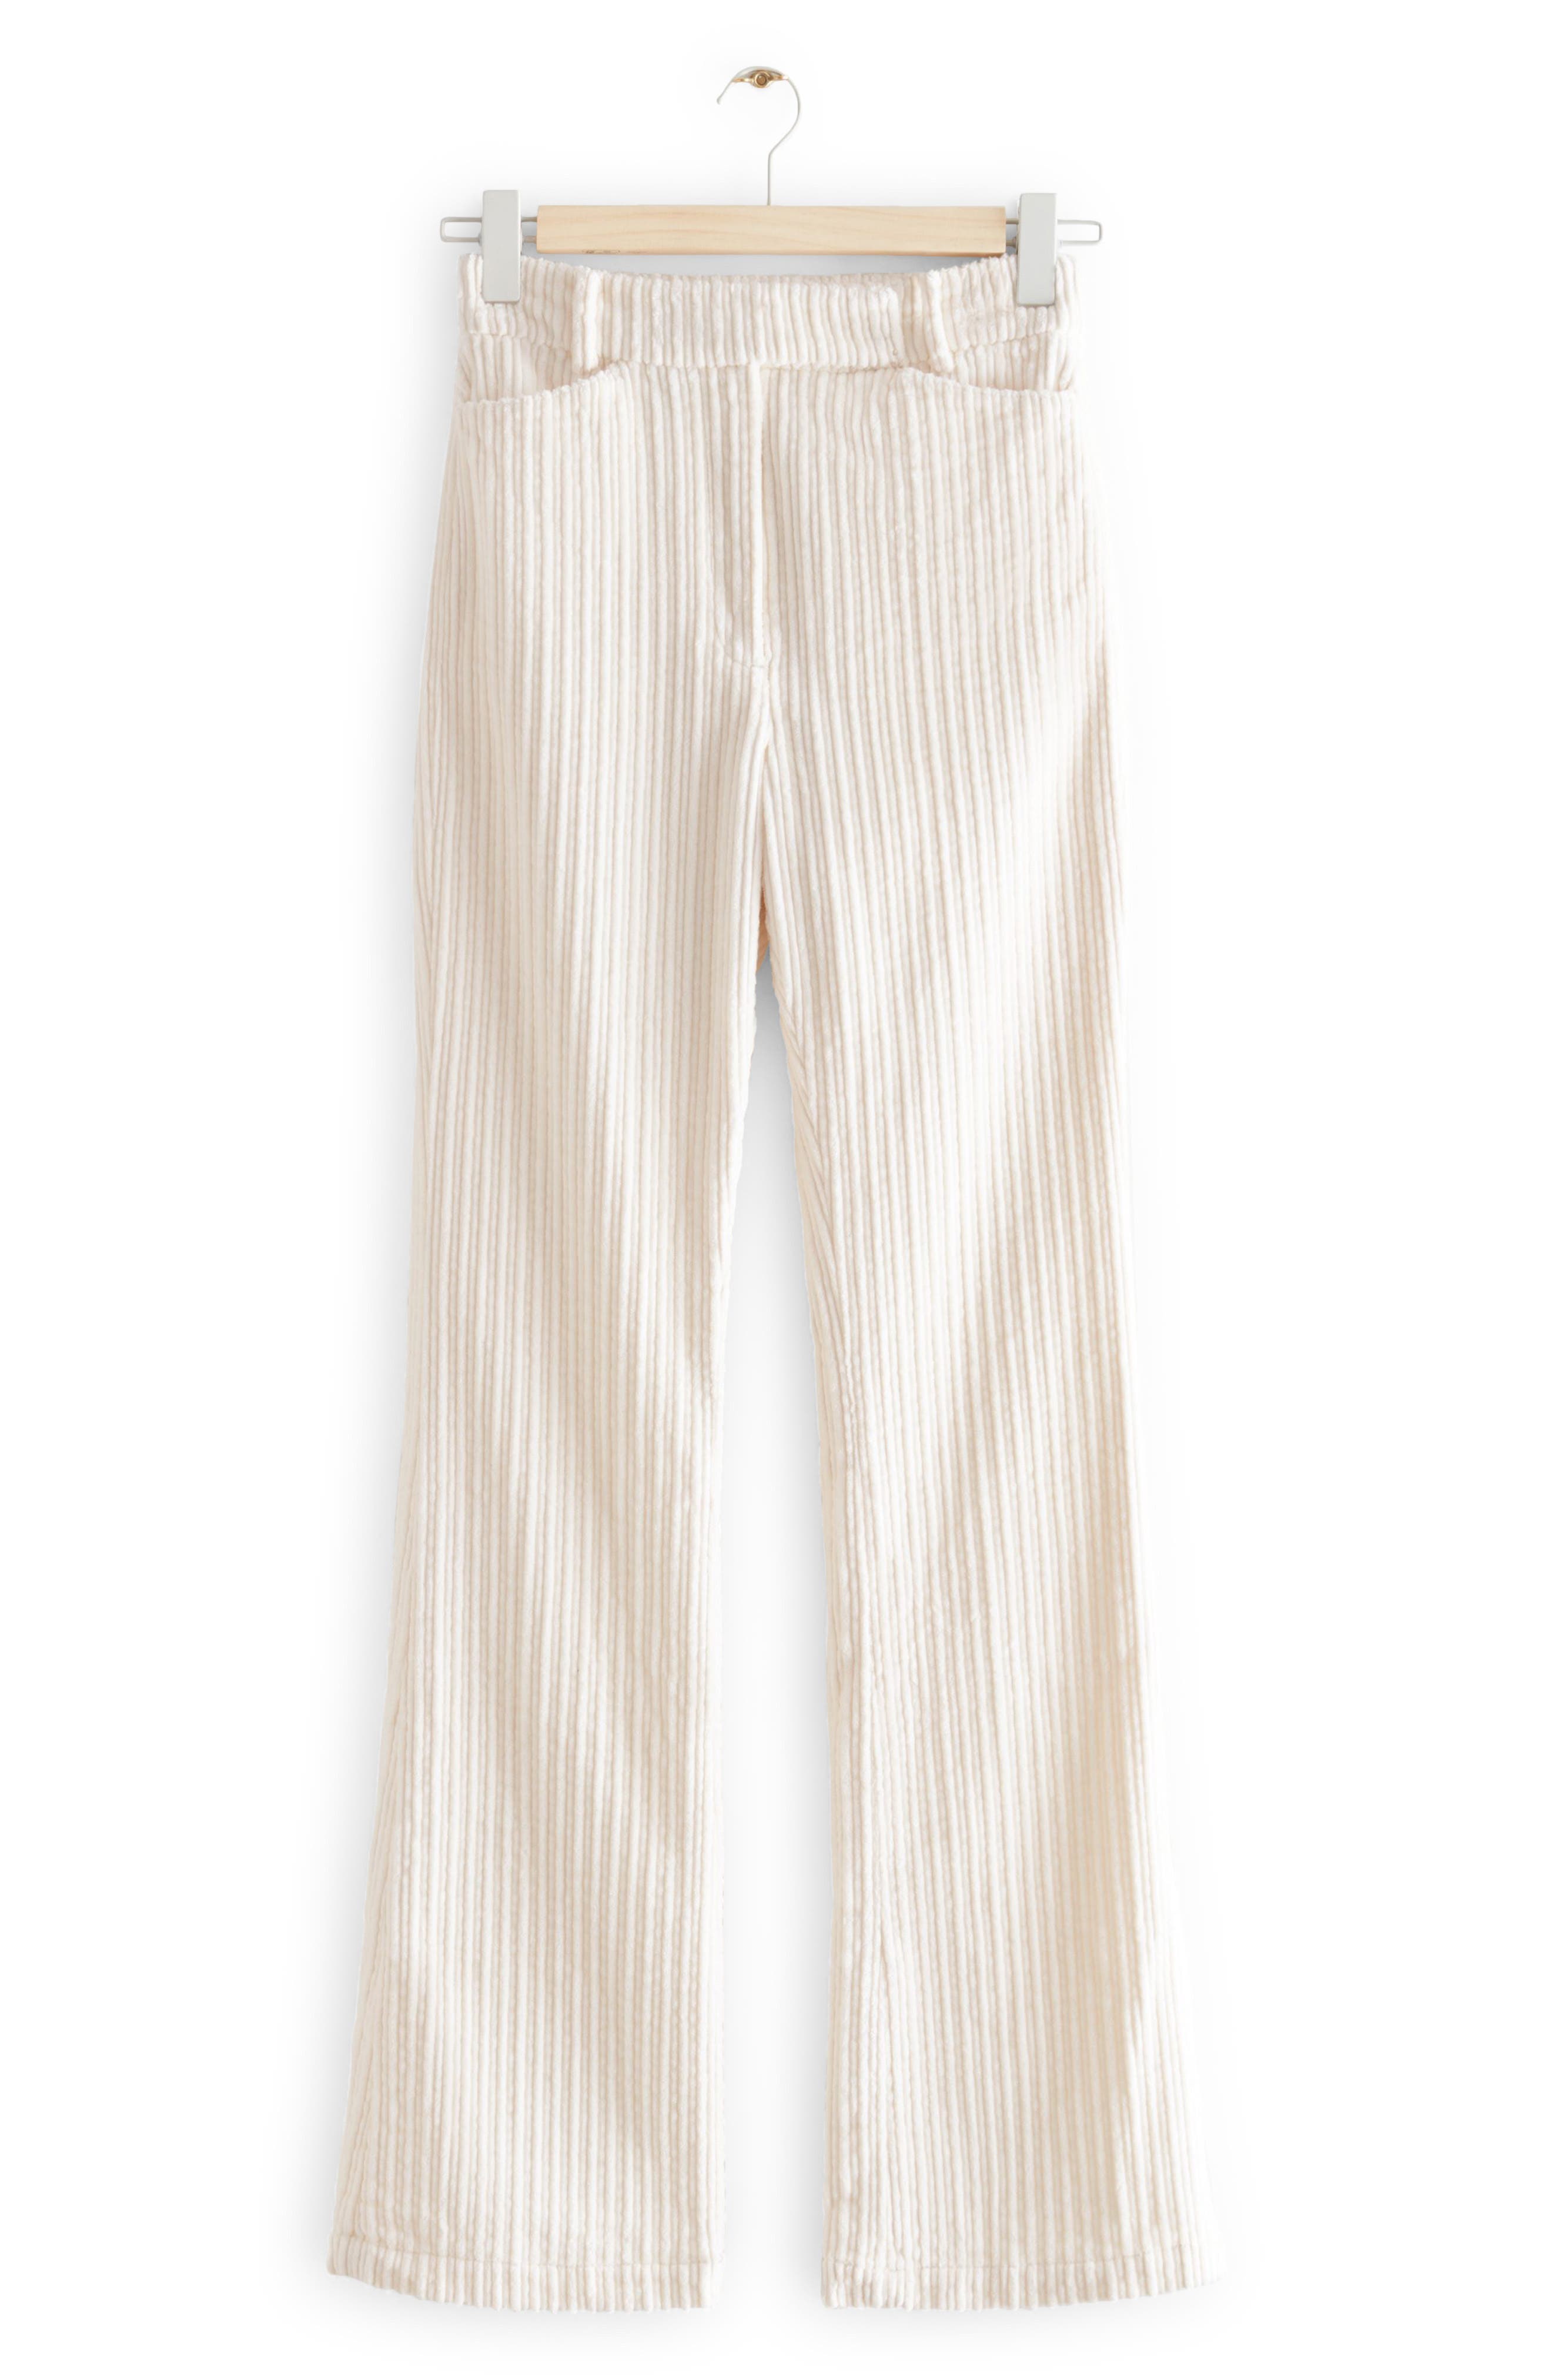 & Other Stories Lucy Stretch Cotton Corduroy Pants | Smart Closet